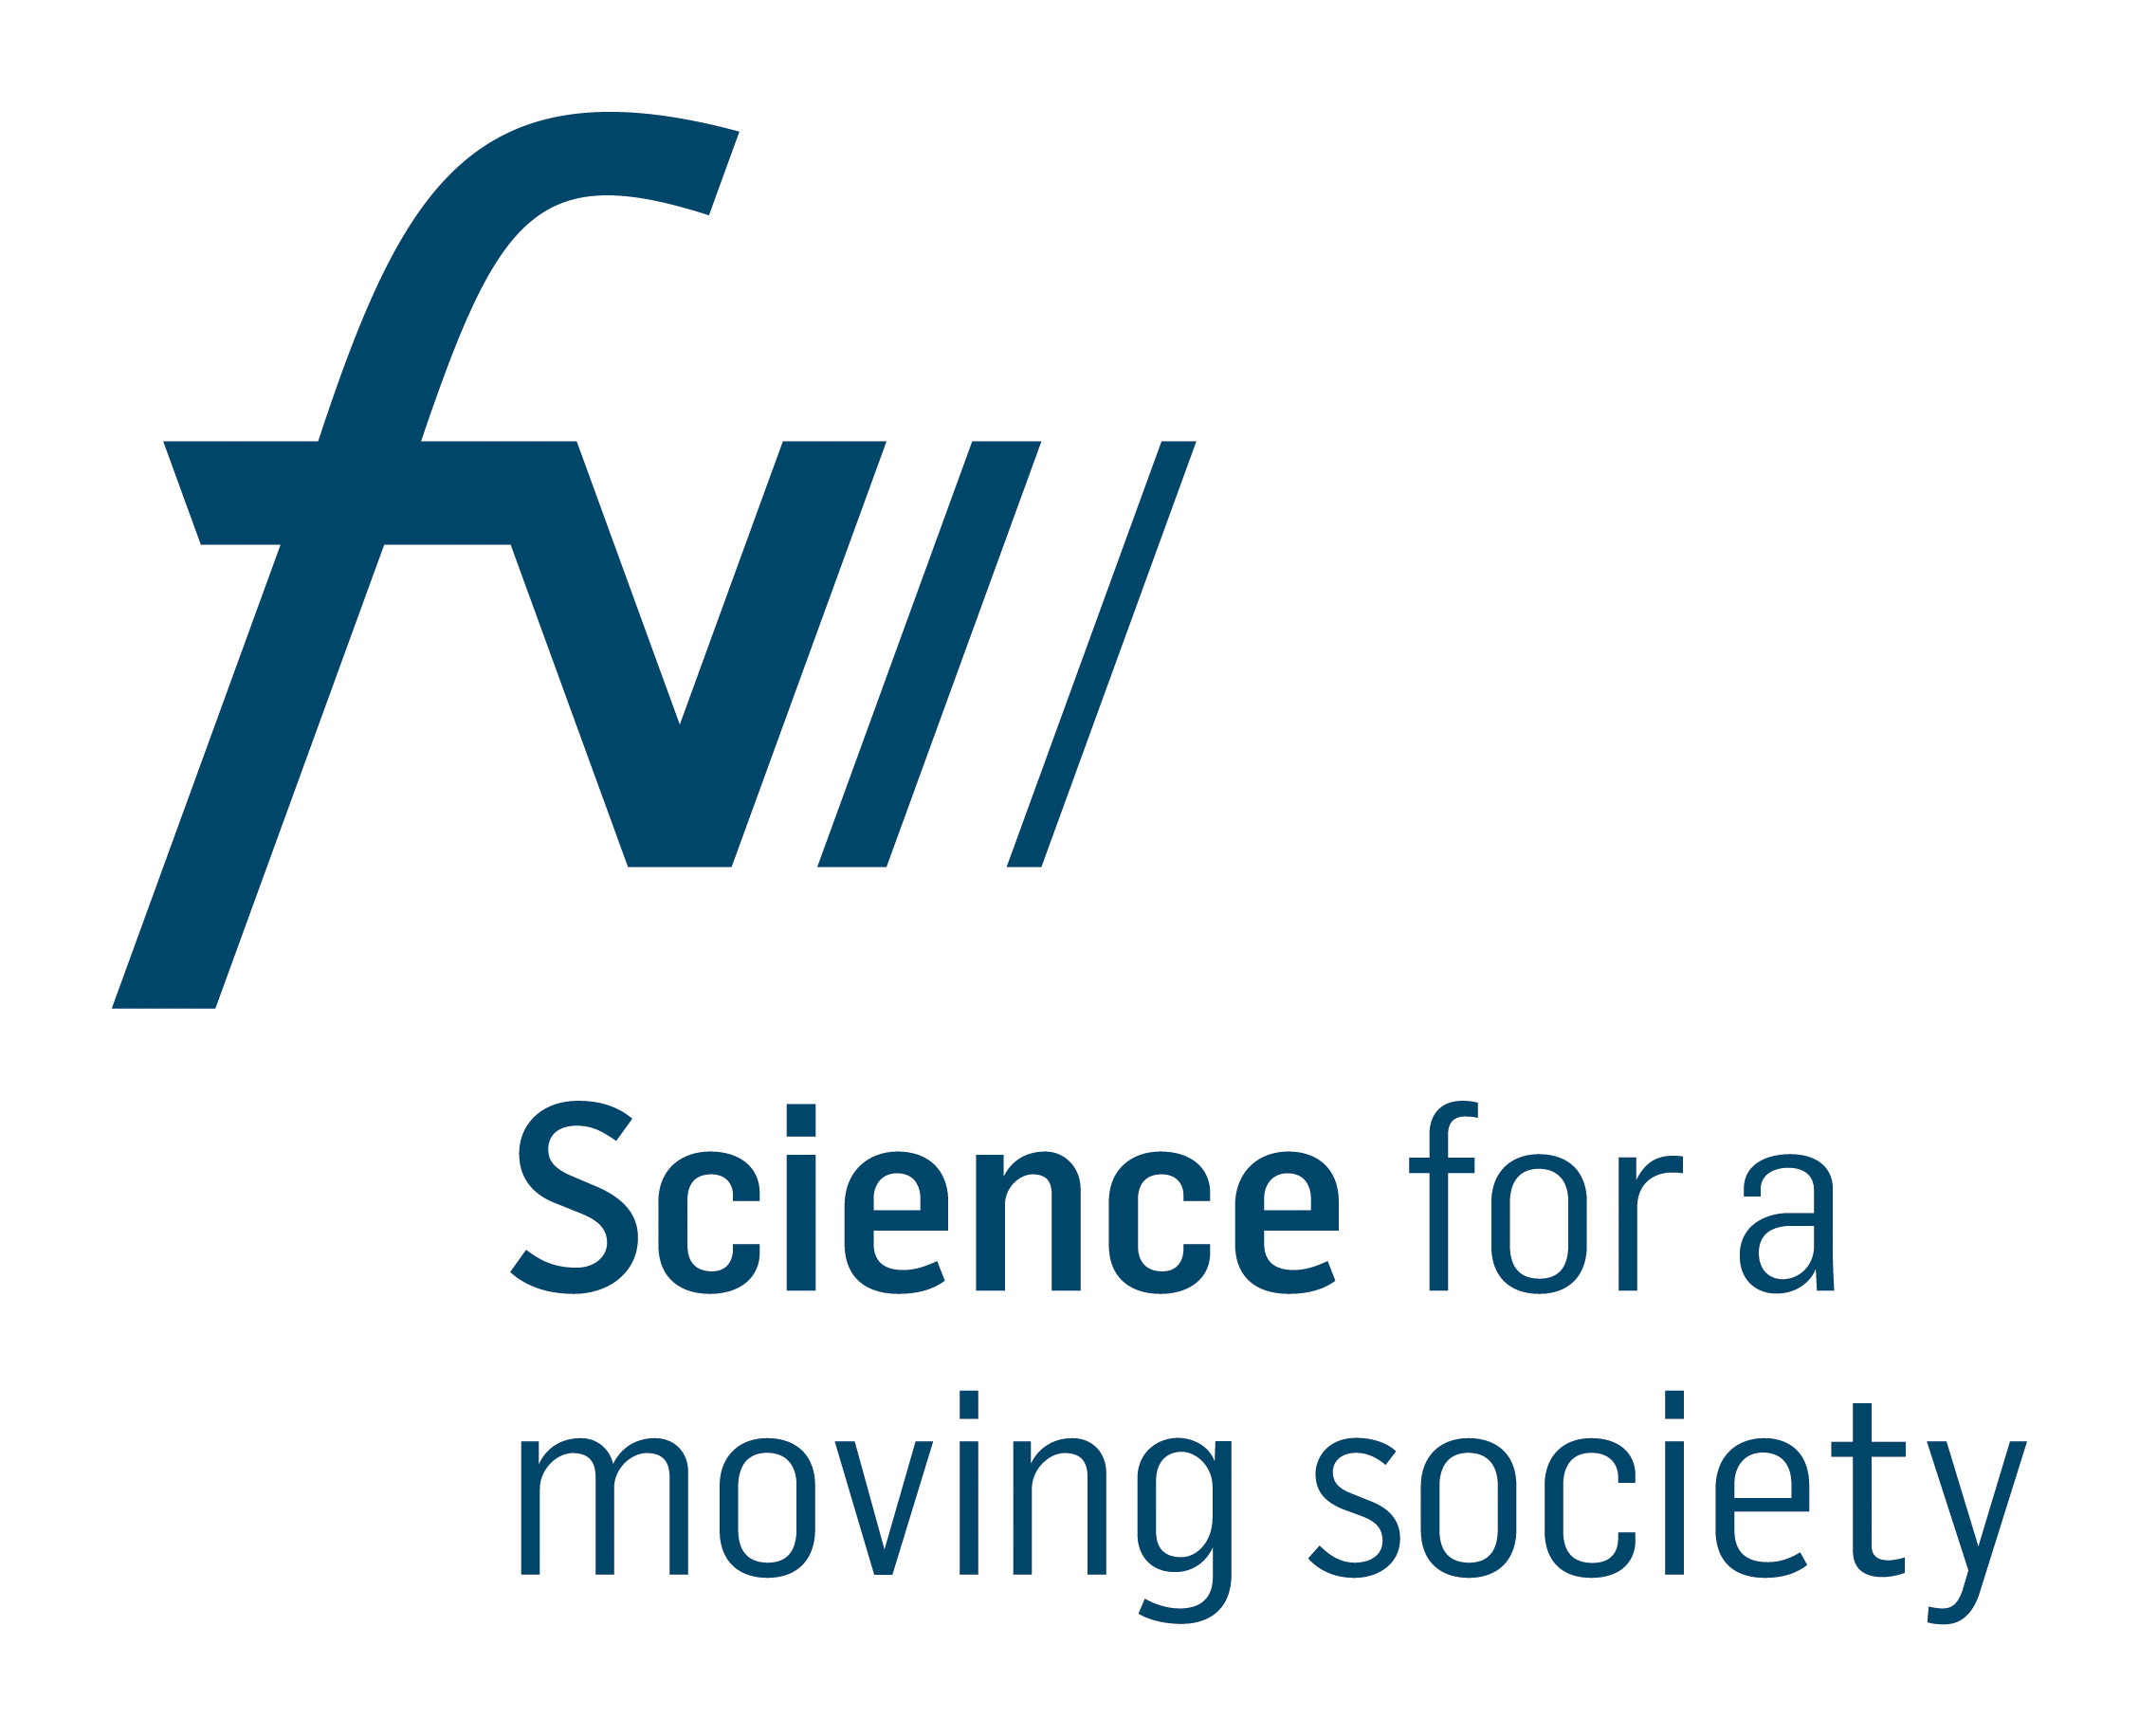 The letters FV with the claim science for a moving society.